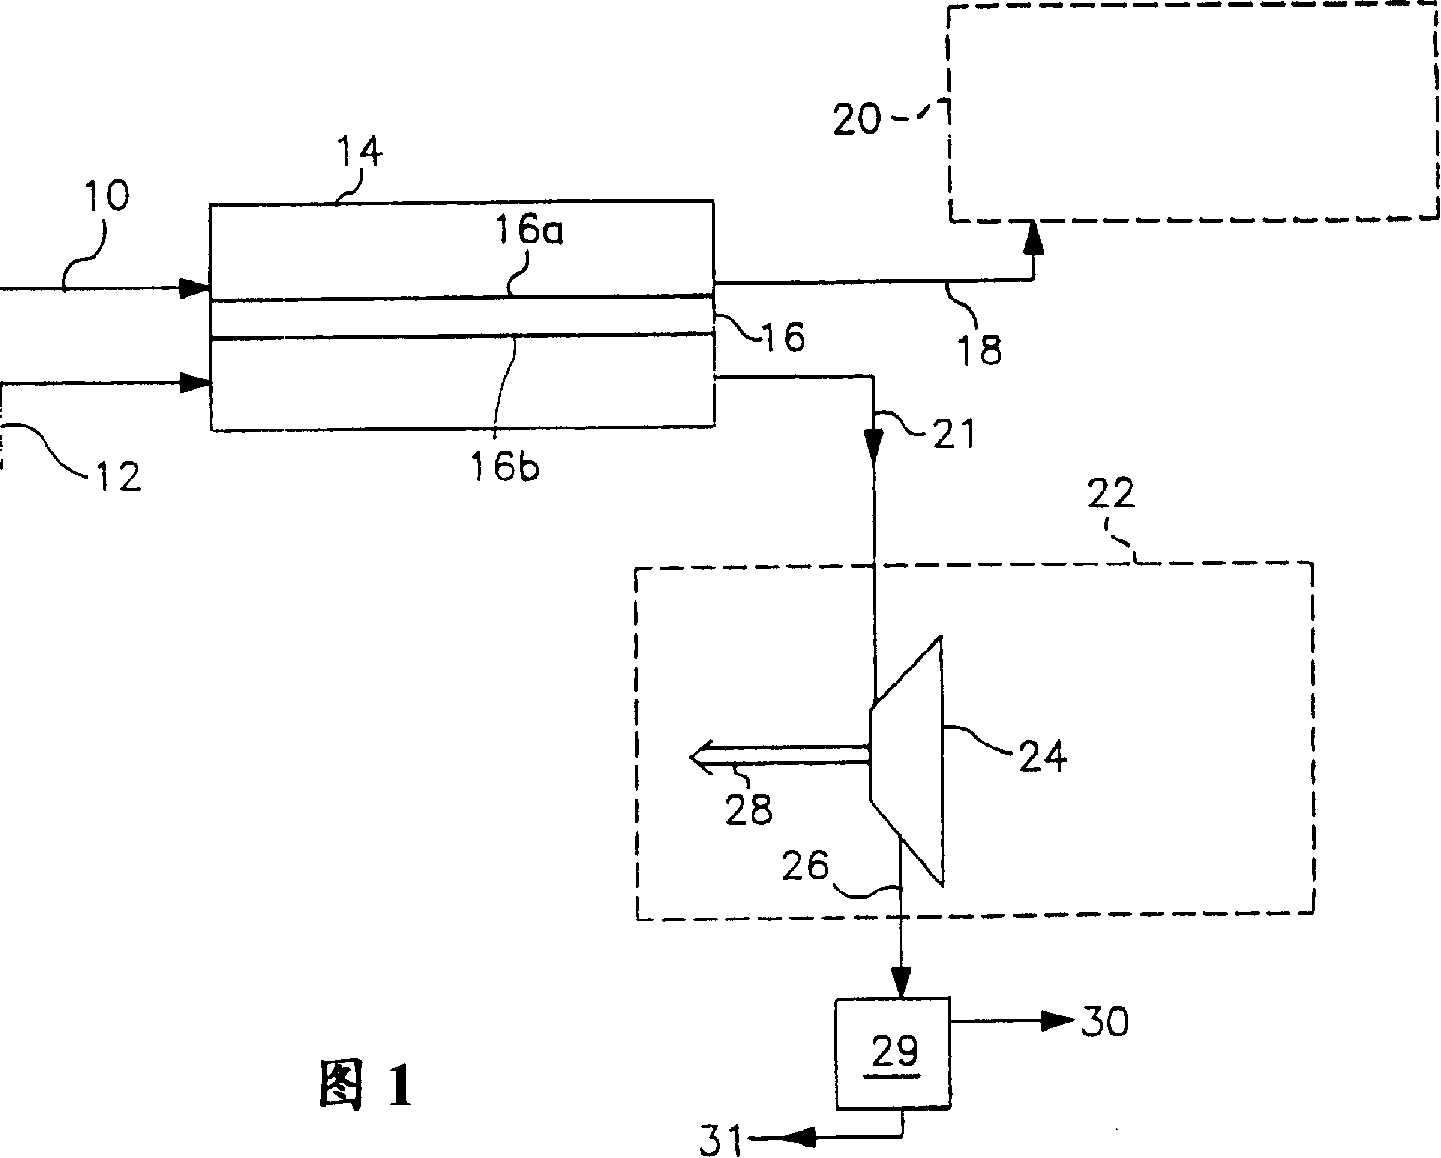 Thermally powered oxygen/nitrogen plant incorporating an oxygen selective ion transport membrane